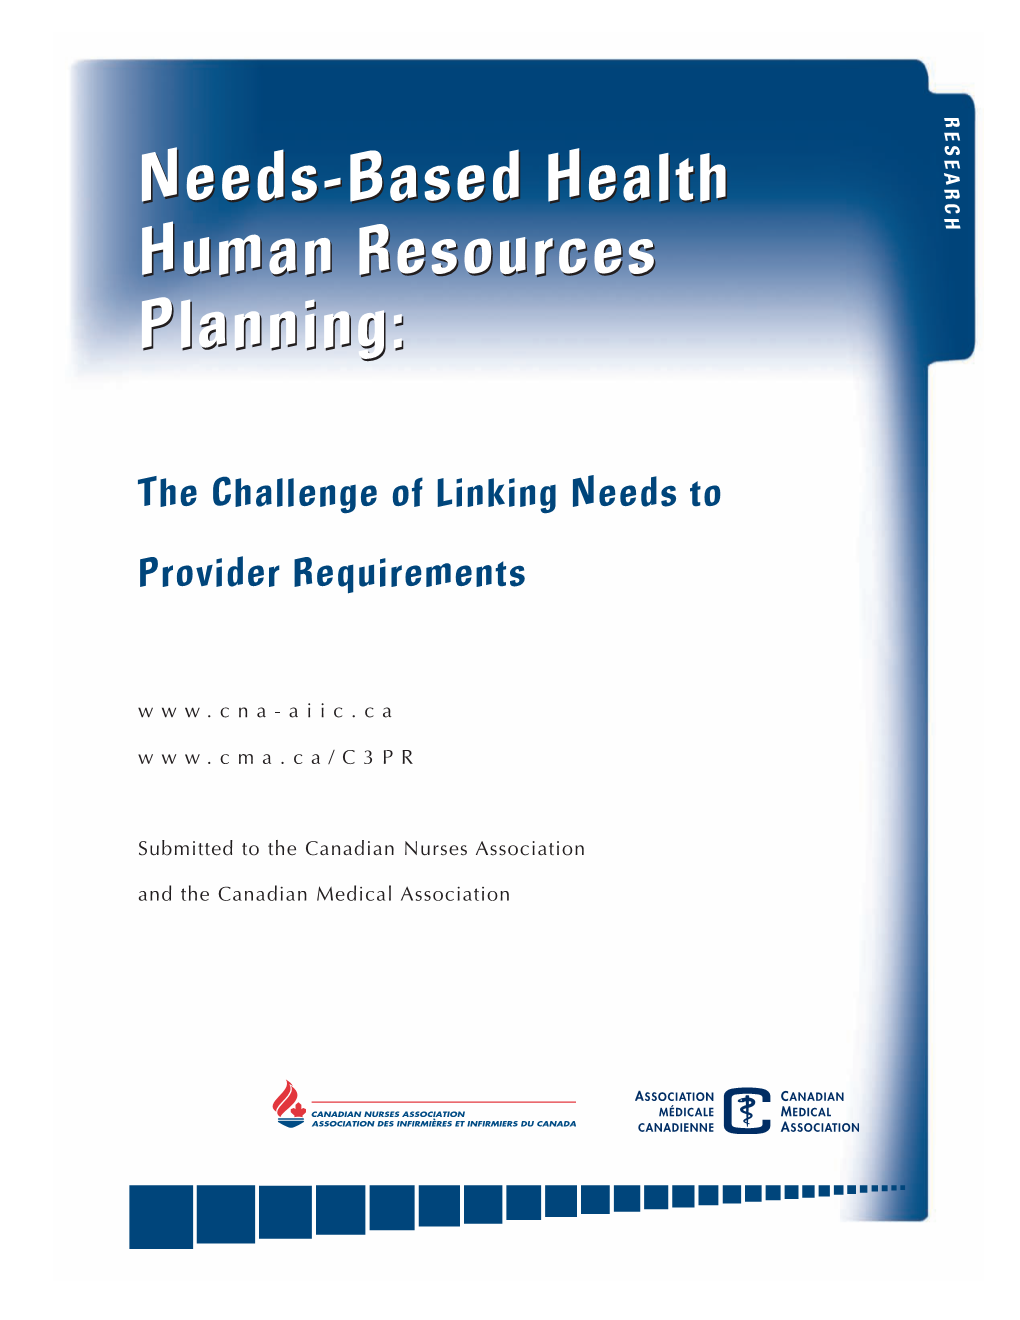 Needs-Based Health Human Resources Planning